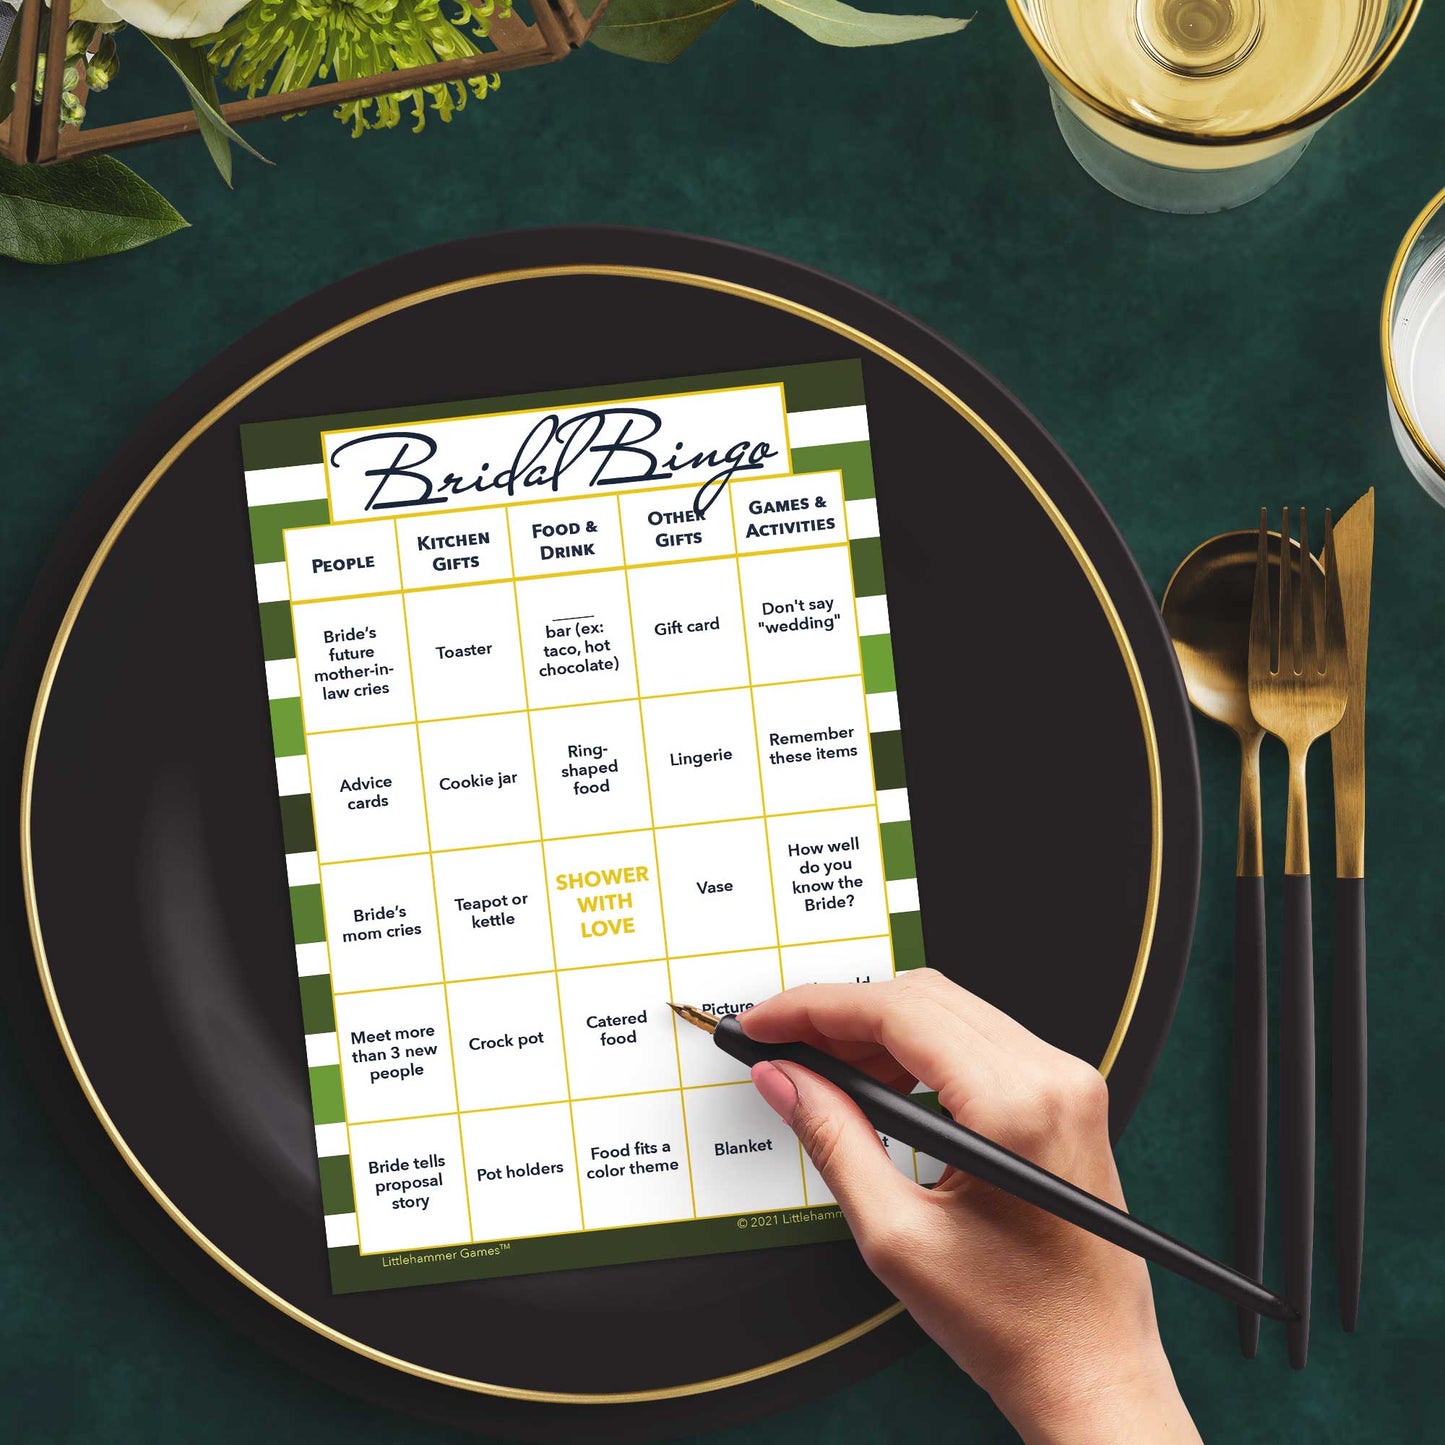 Woman with a pen sitting at a table with a green-striped Bridal Bingo game card on a black and gold plate at a dark place setting